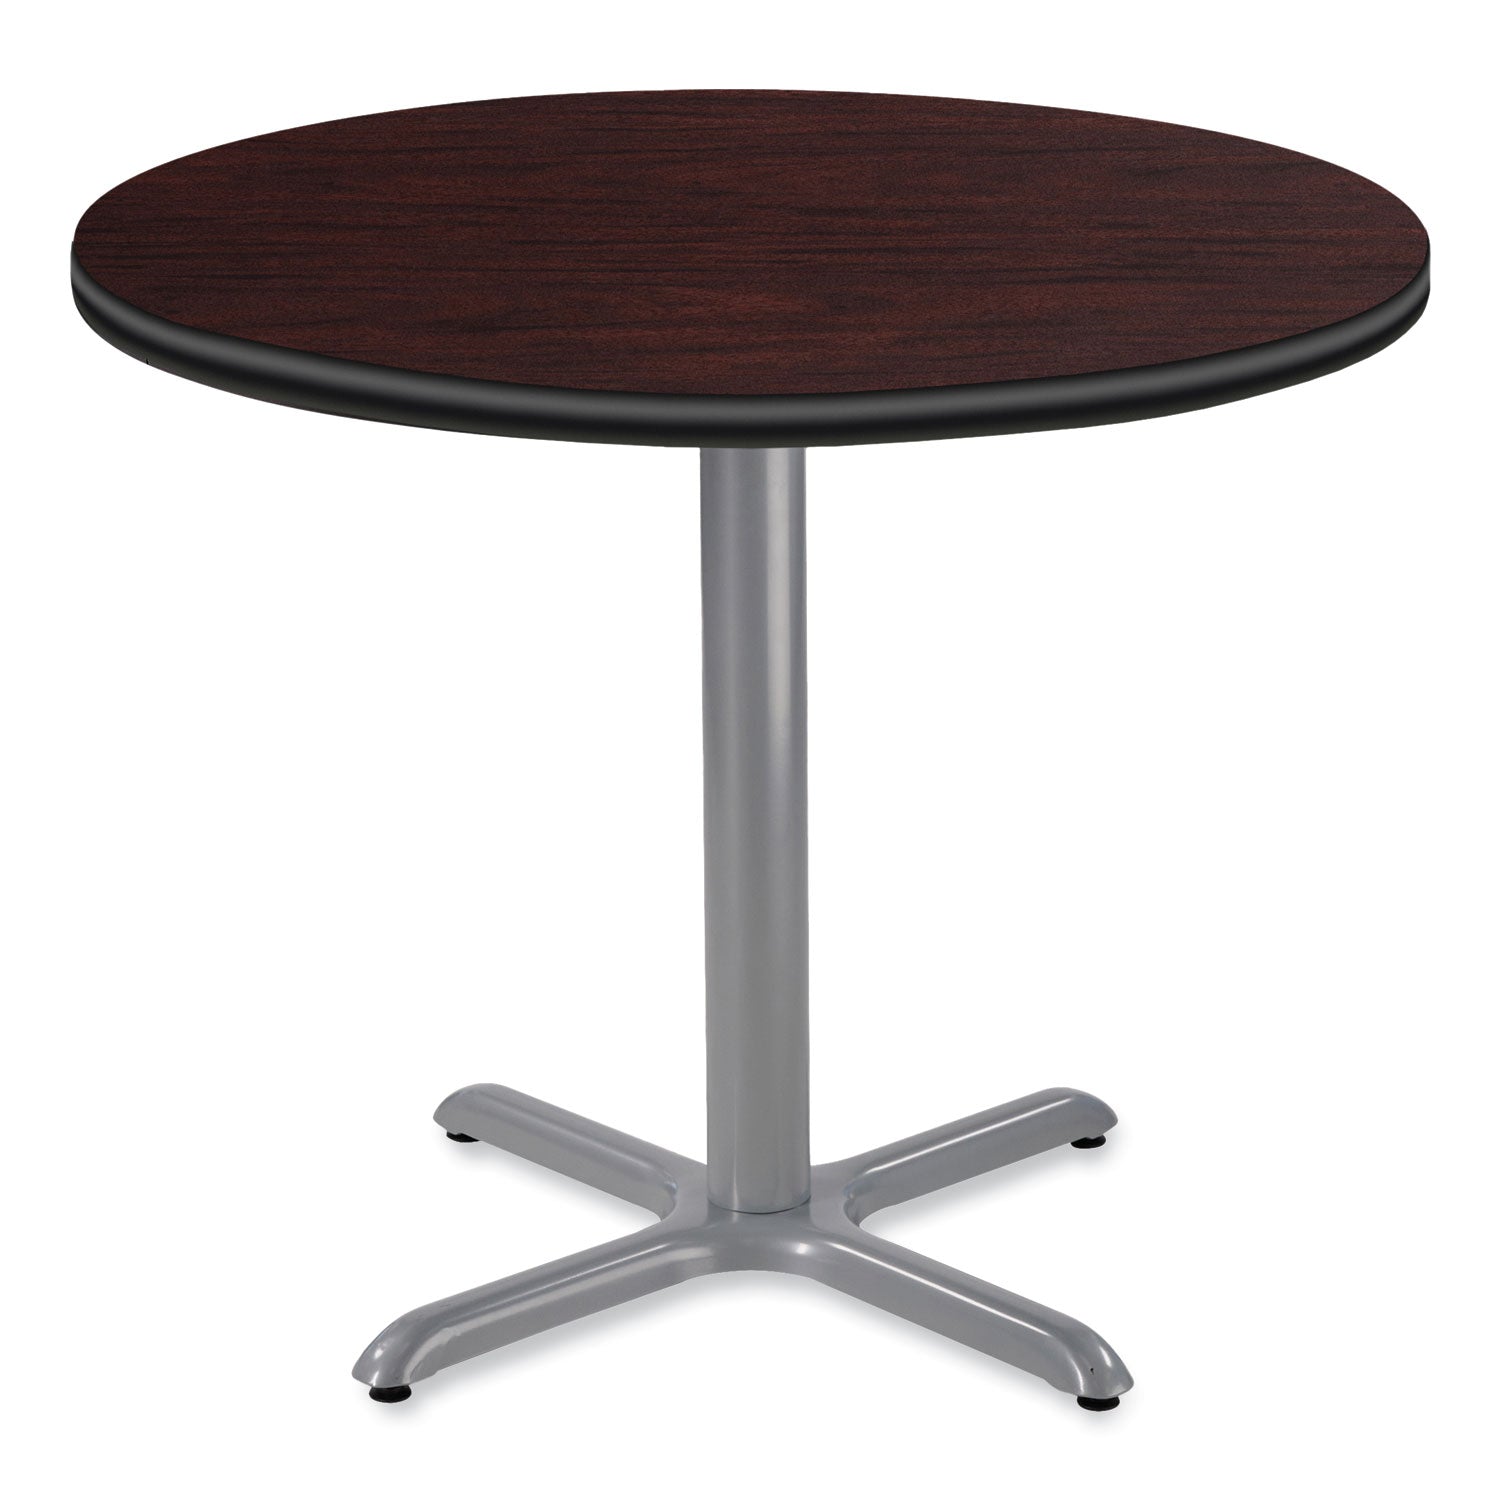 cafe-table-36-diameter-x-30h-round-top-x-base-mahogany-top-gray-base-ships-in-7-10-business-days_npscg13636xd1my - 1